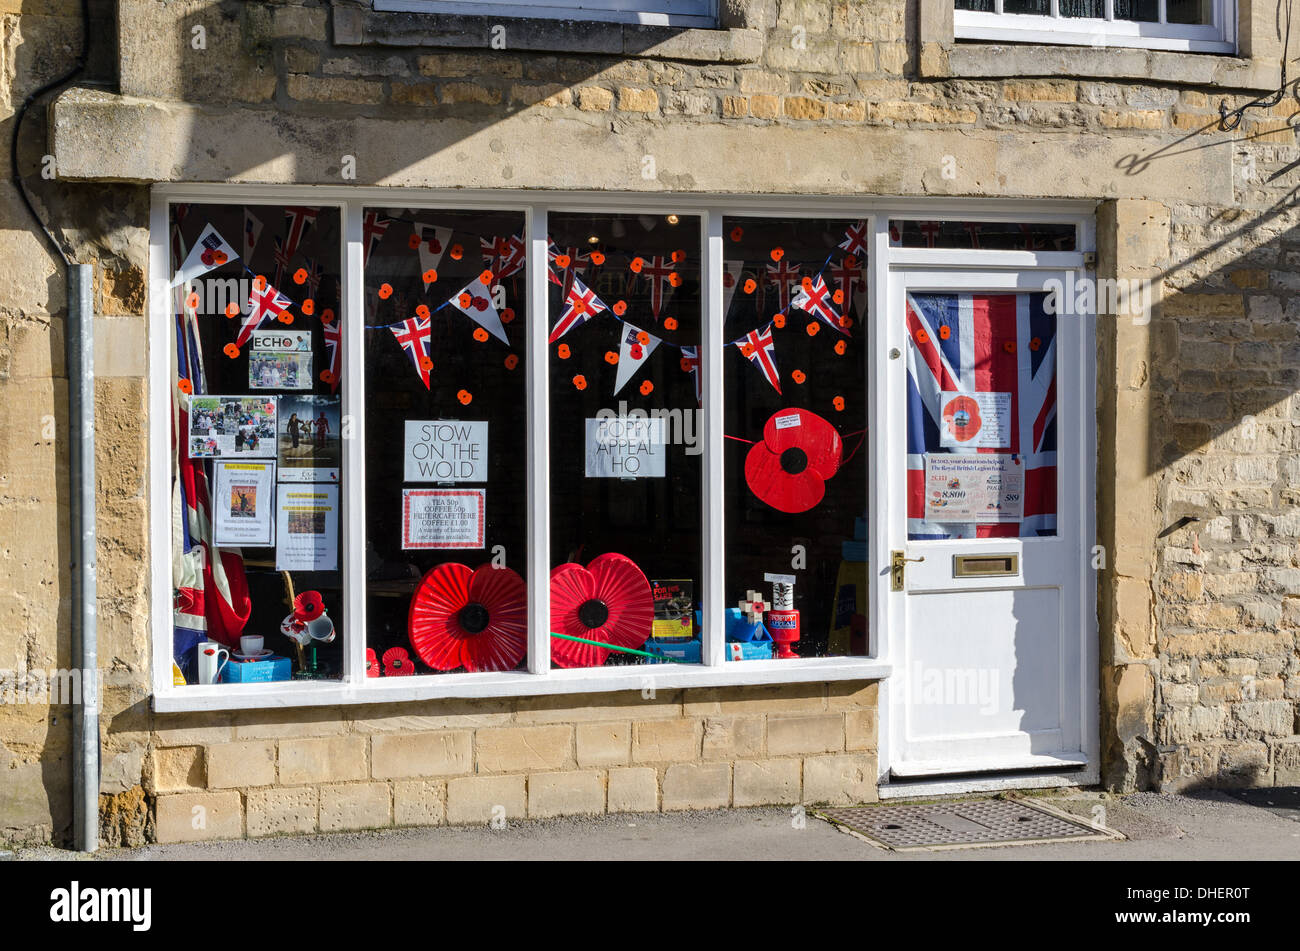 Stow-on-the-Wold Poppy Appeal HQ in the Cotswold town Stock Photo